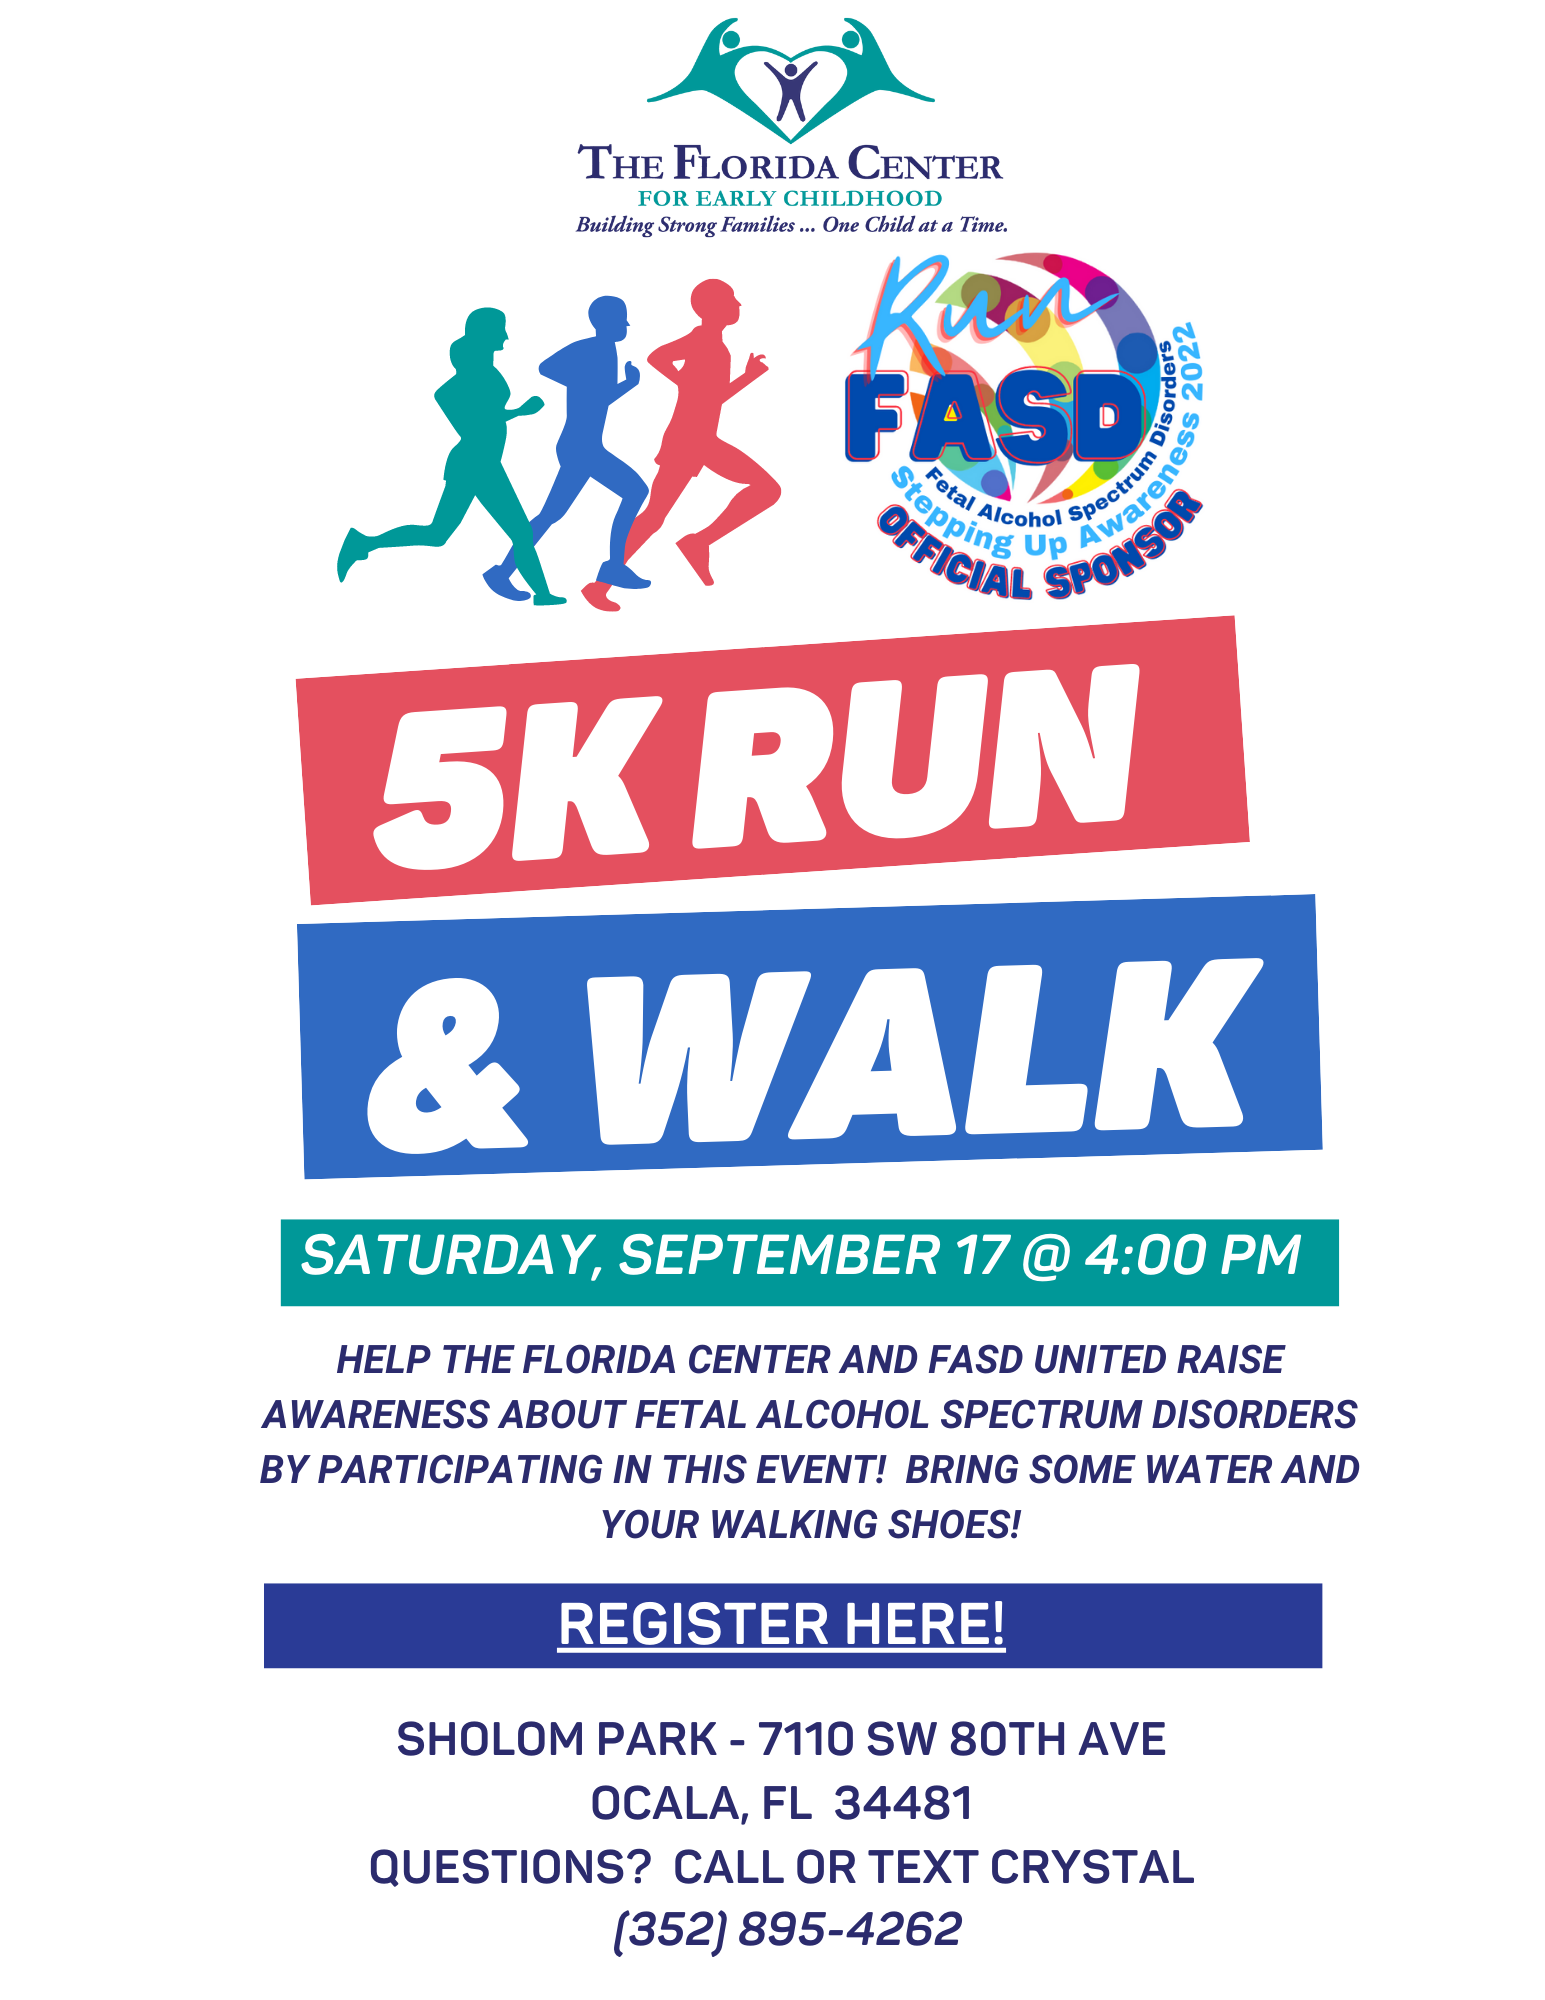 Ocala 5K Run/Walk Sponsored by The Florida Center for Early Childhood